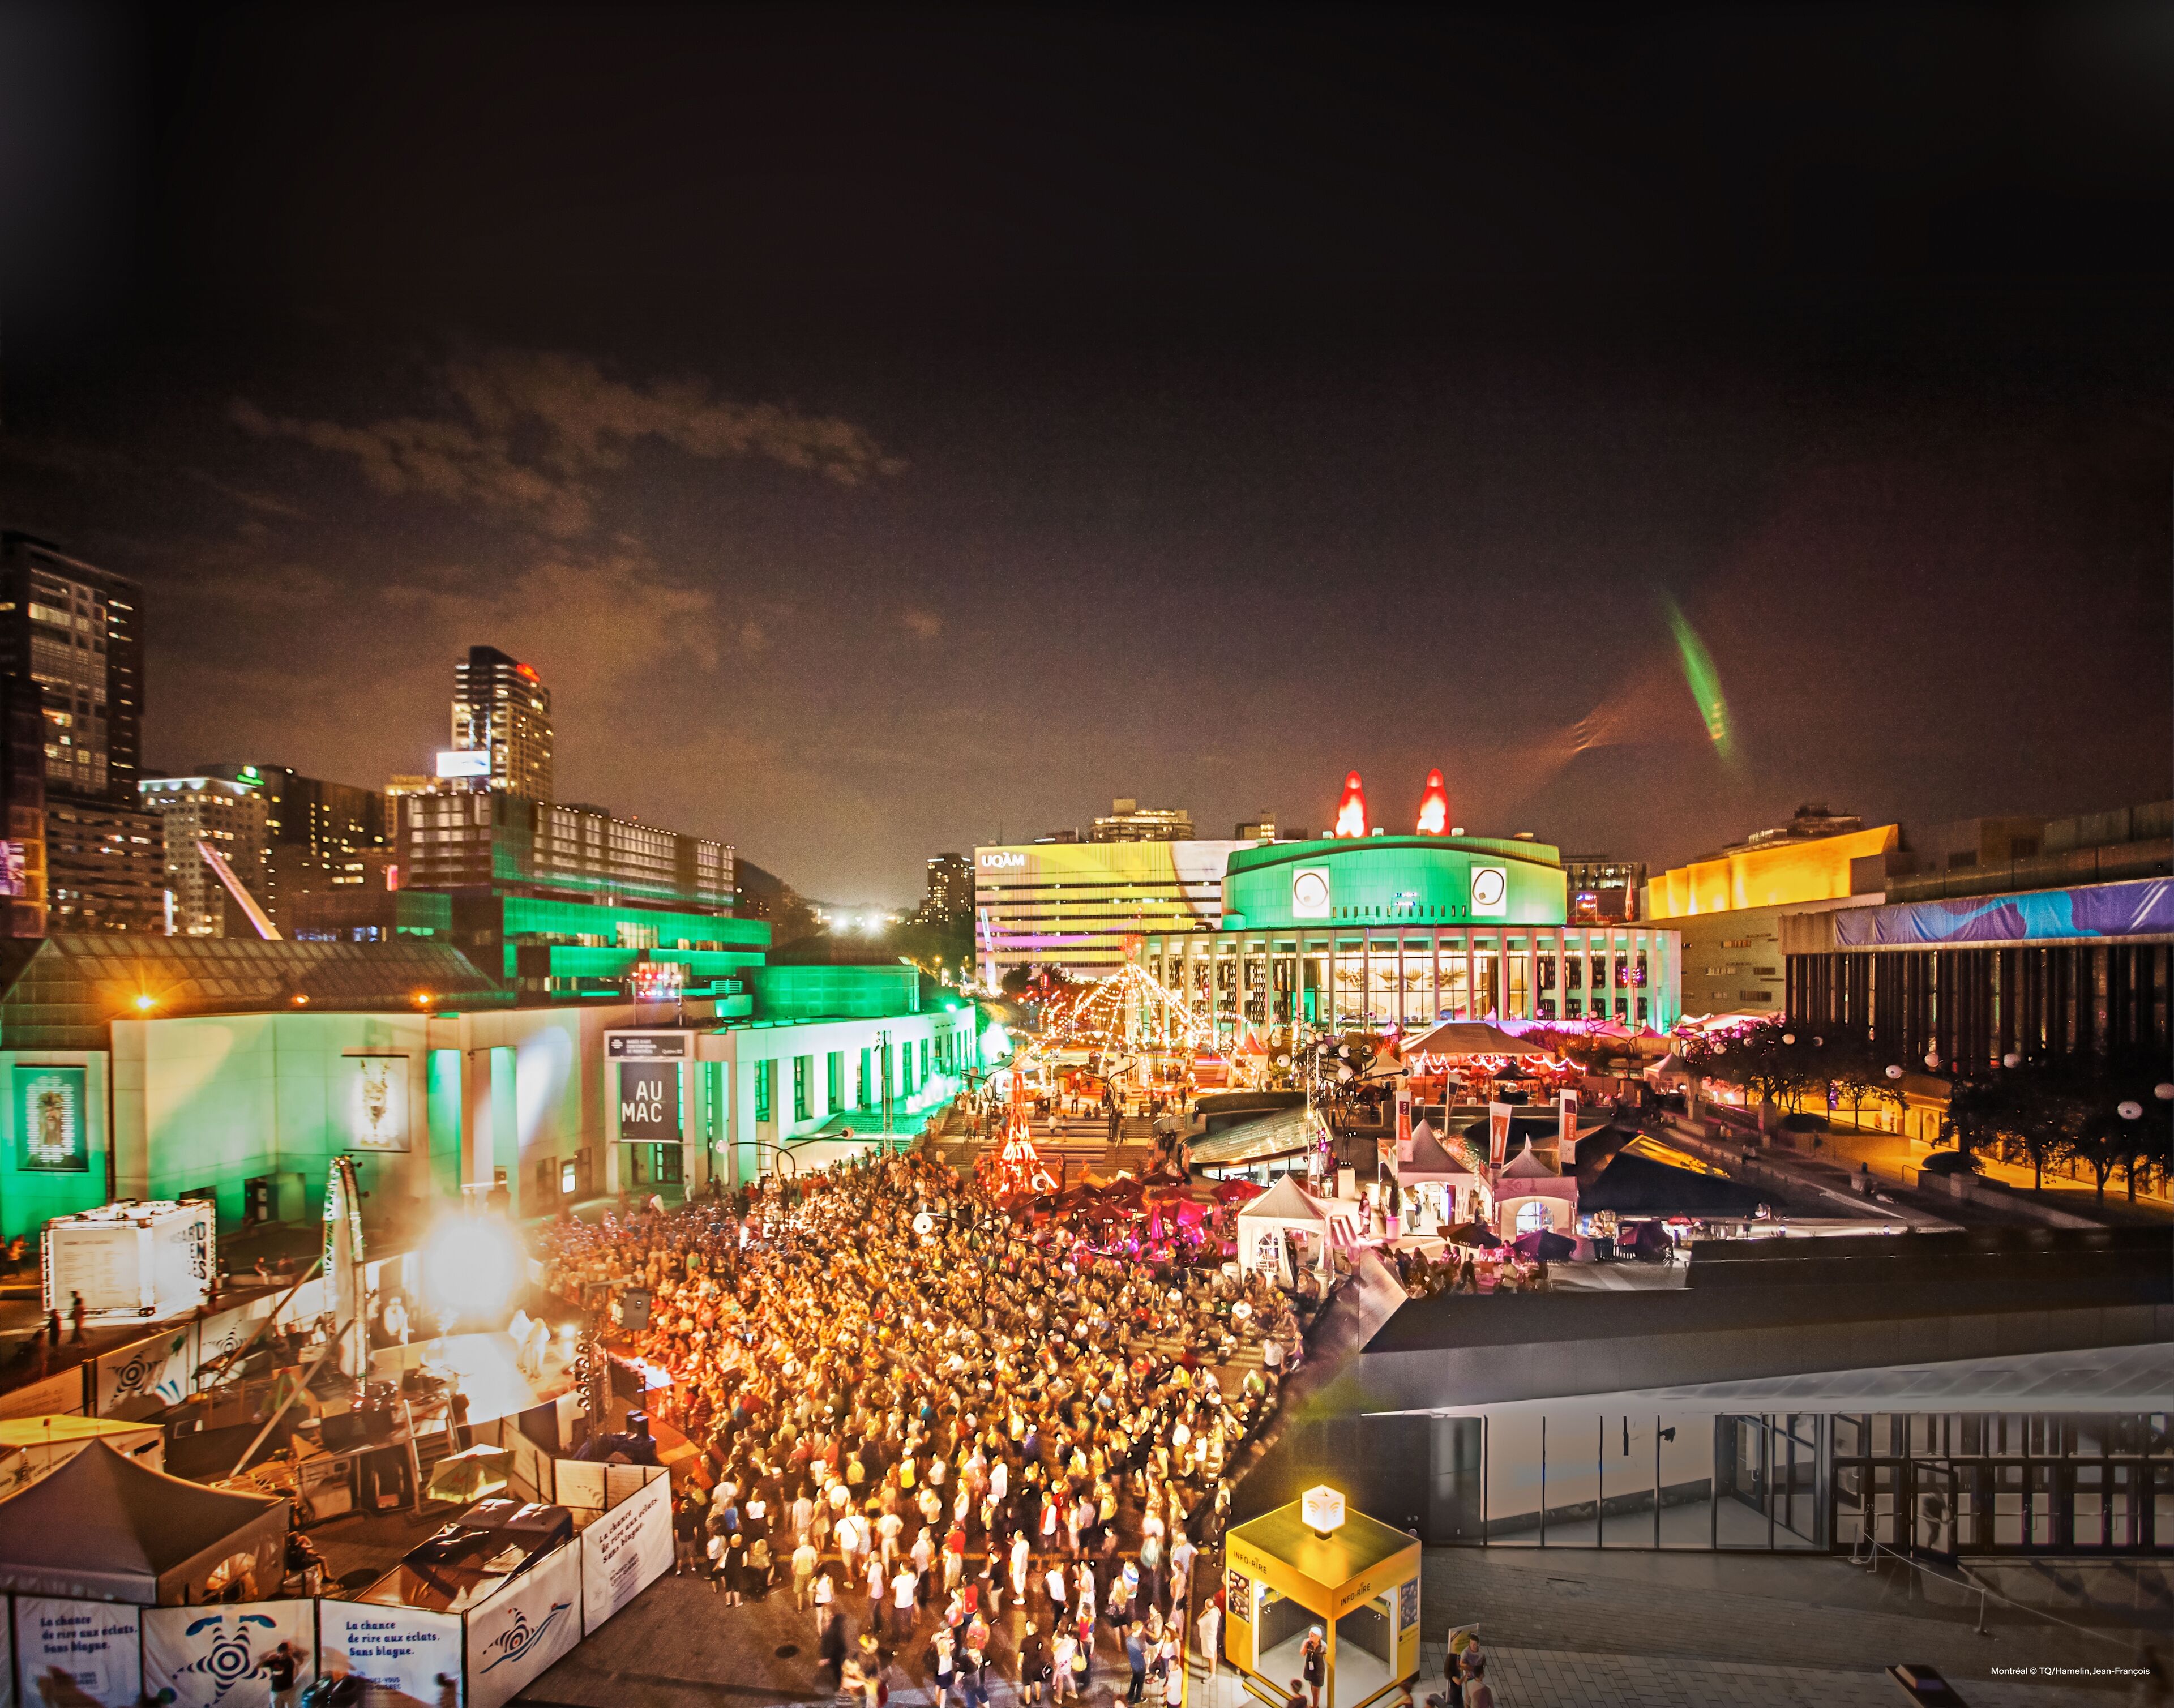 A bustling night festival in the city, with crowds of people gathered around the stage area, vibrant lighting, and city buildings in the background